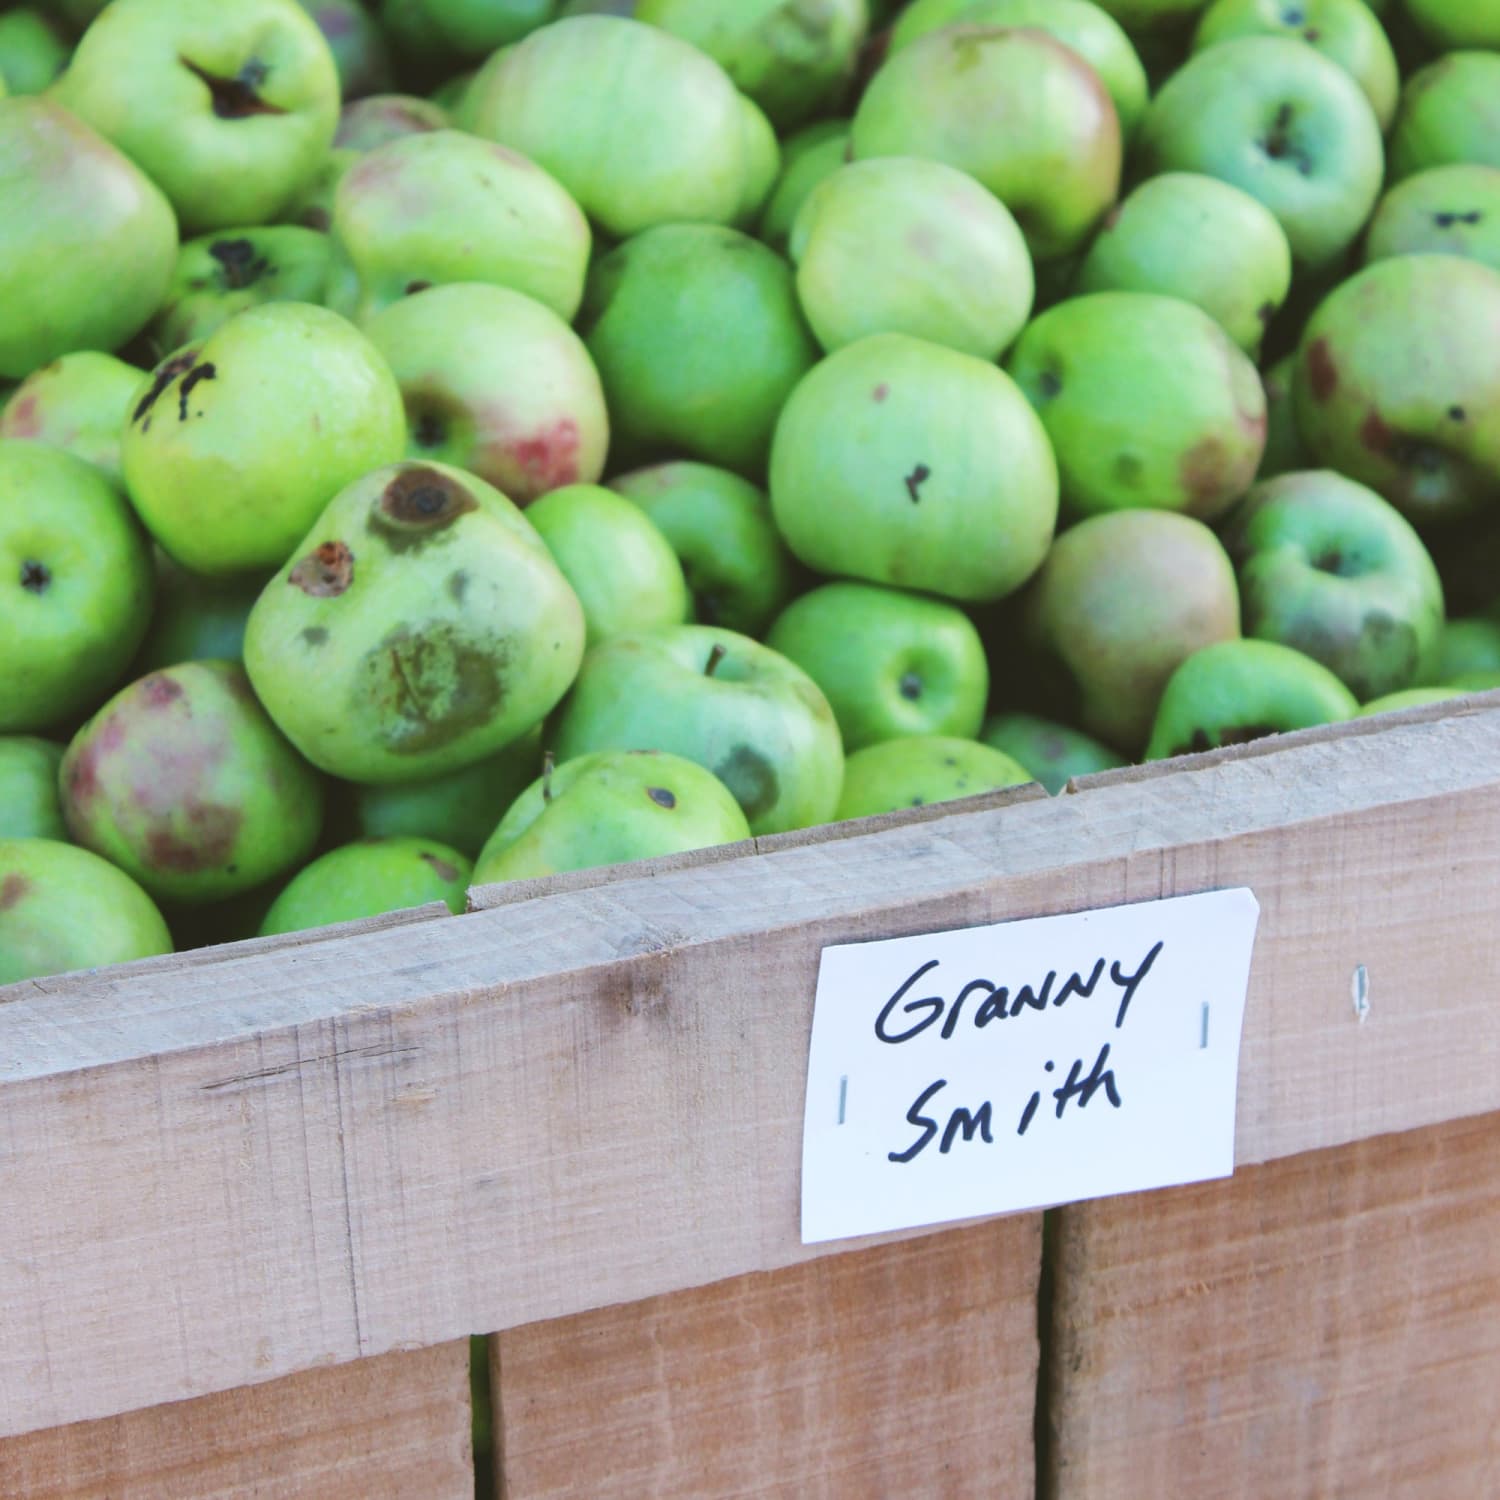 Small Granny Smith Apple - Each, Small/ 1 Count - Ralphs